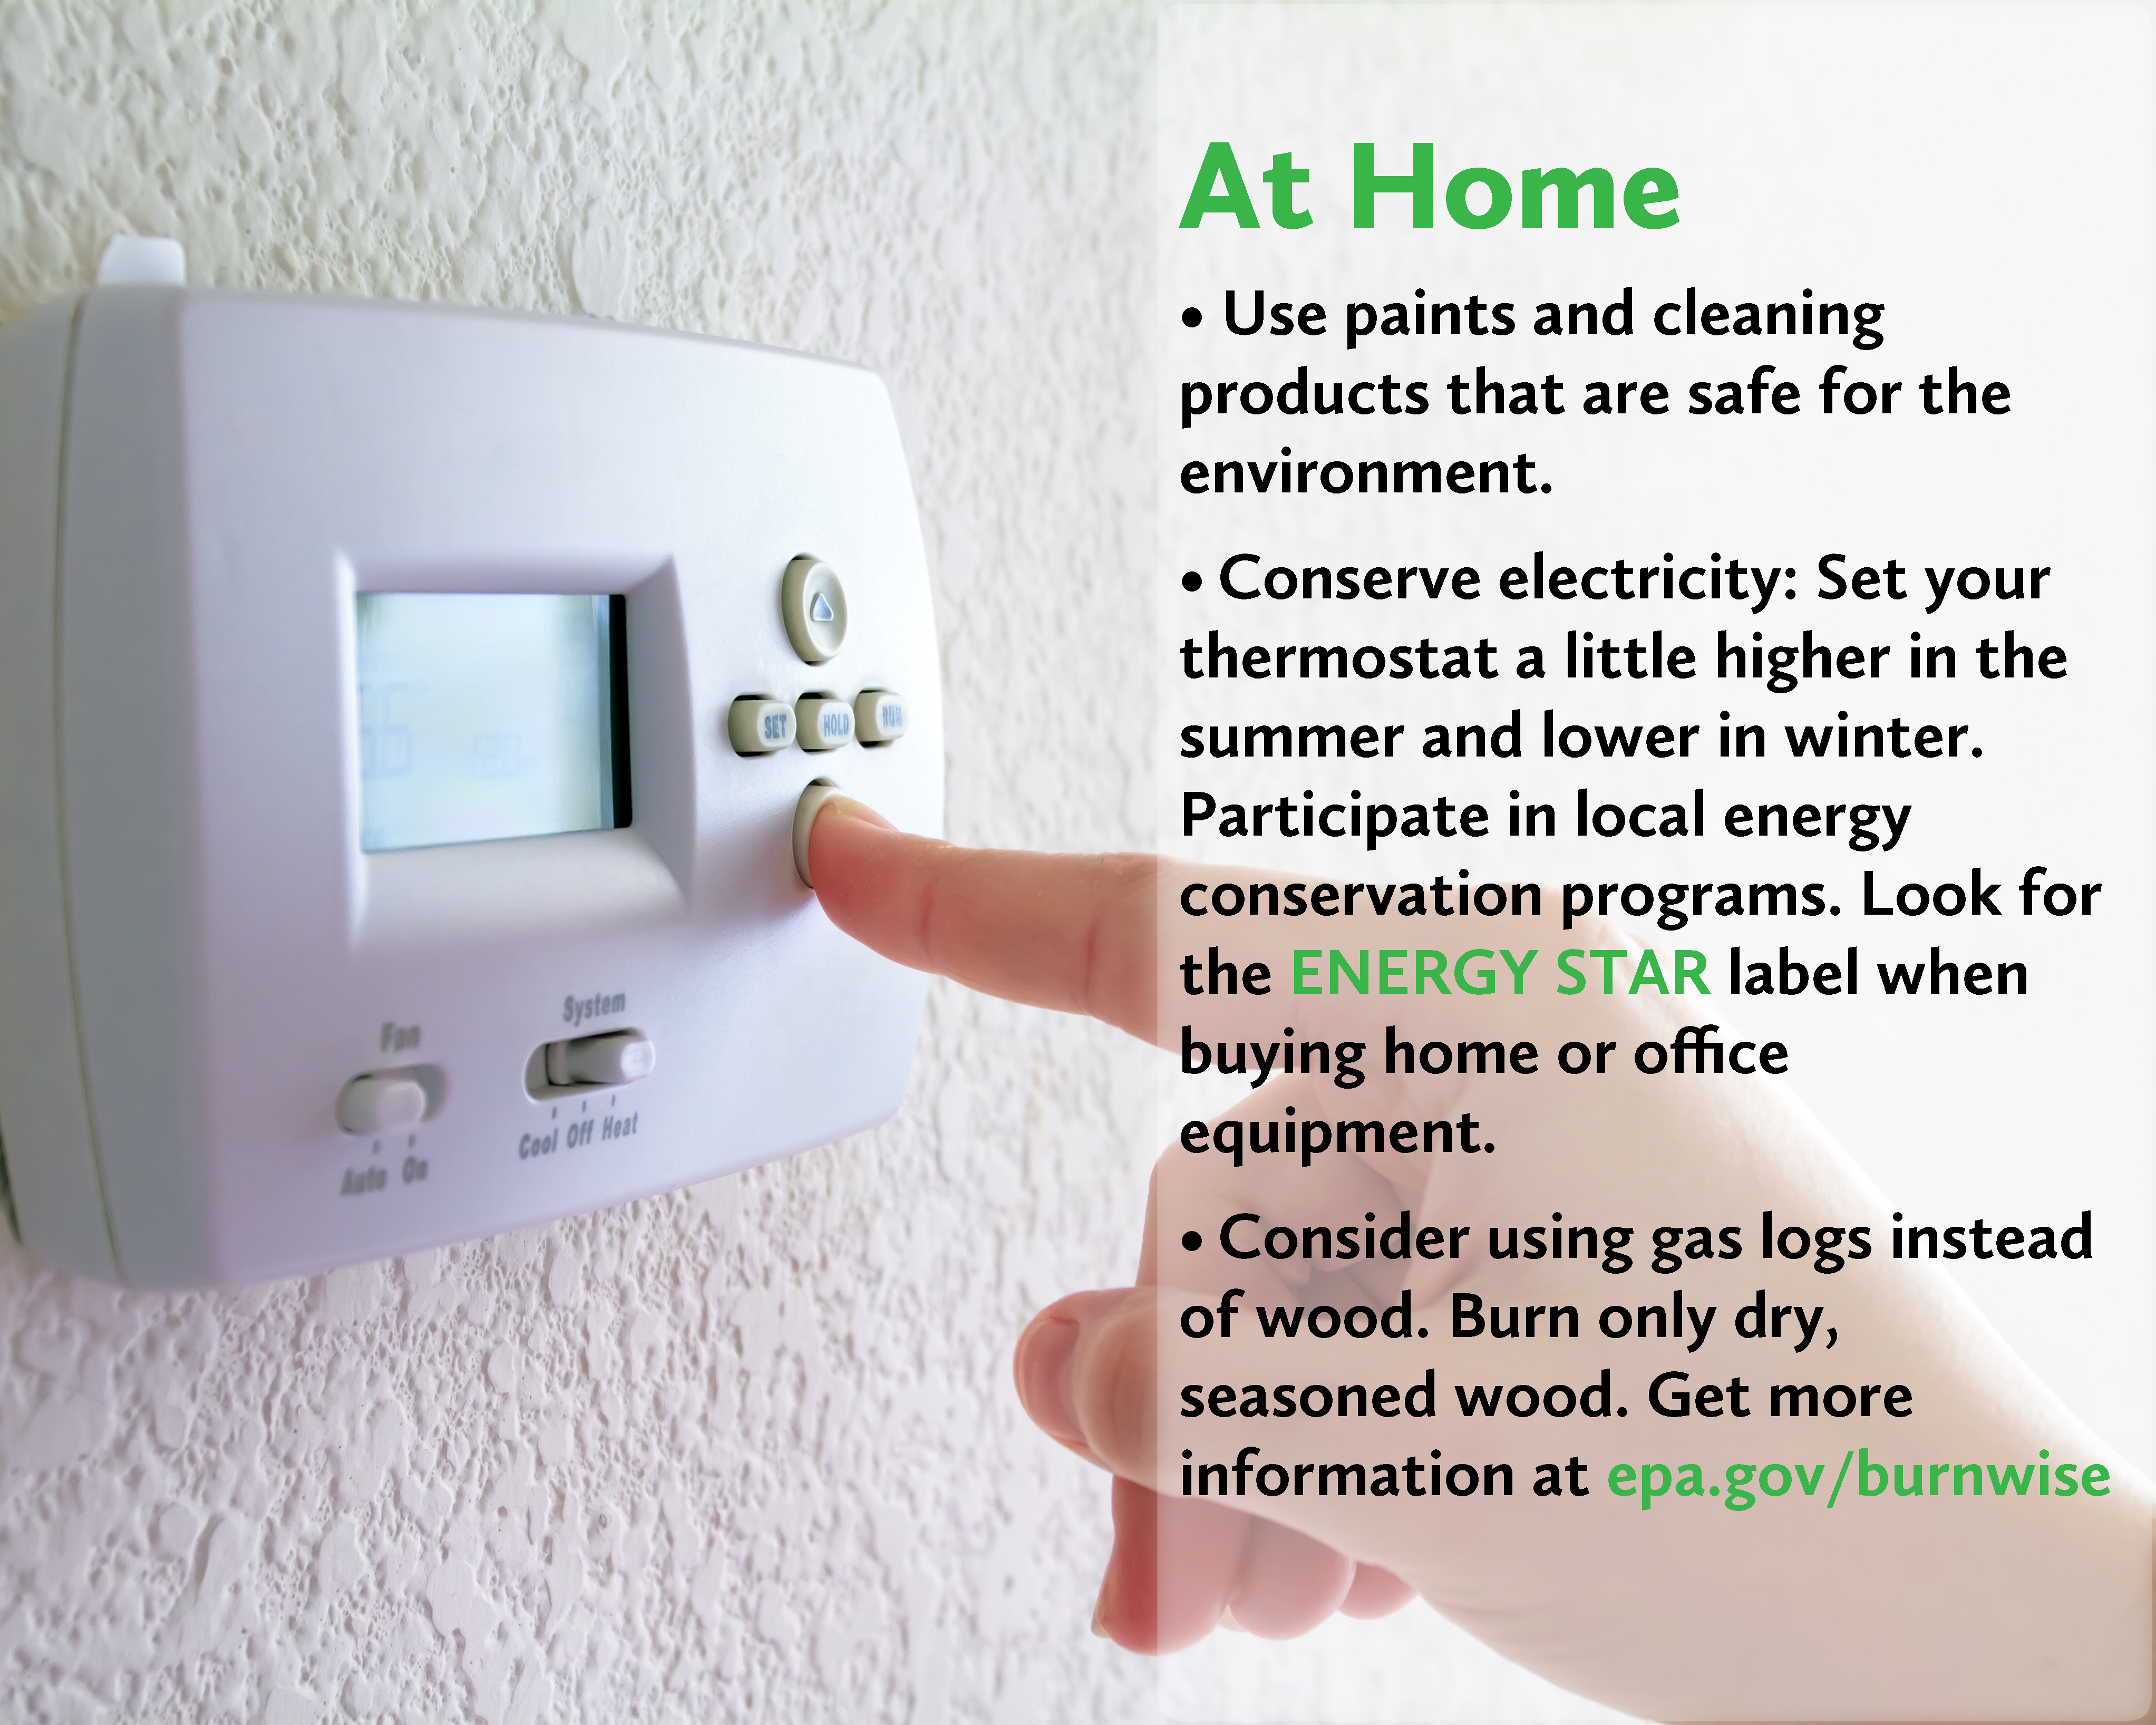 At Home. Use paints and cleaning products that are safe for the environment. Conserve electricity: Set your thermostat a little higher in the summer and lower in winter. Participate in local energy conservation programs. Look for the ENERGY STAR label when buying home or office equipment. Consider using gas logs instead of wood. Burn only dry, seasoned wood. Get more information at EPA Burn Wise.